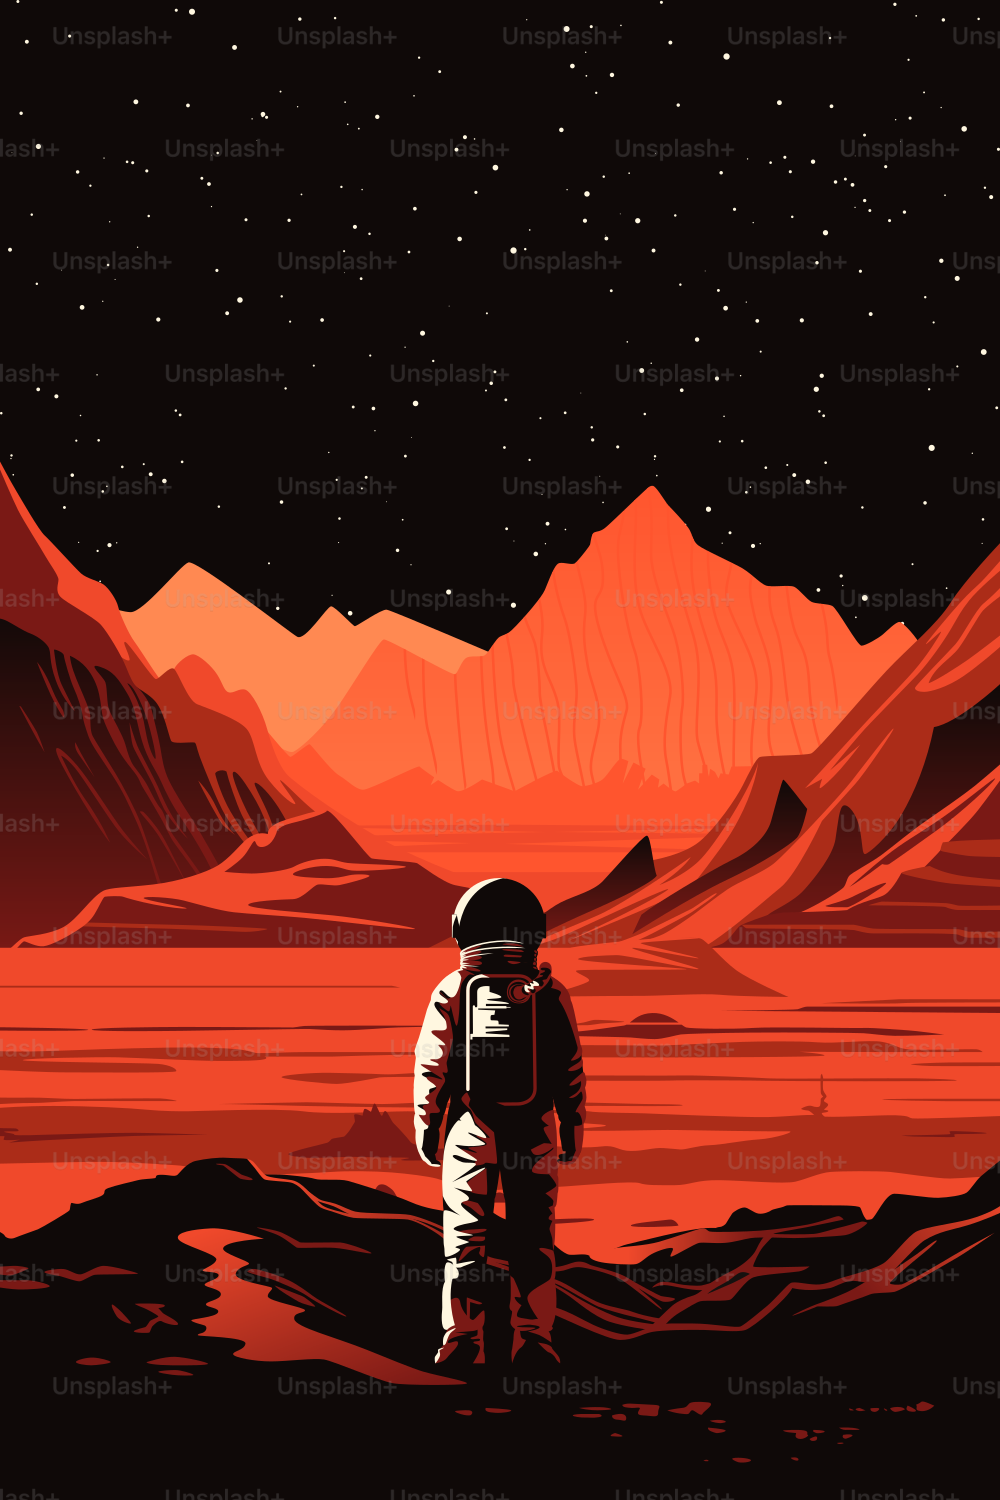 Colonization of Mars. Human Solar System Exploration. An Astronaut on the Surface of the Red Planet.